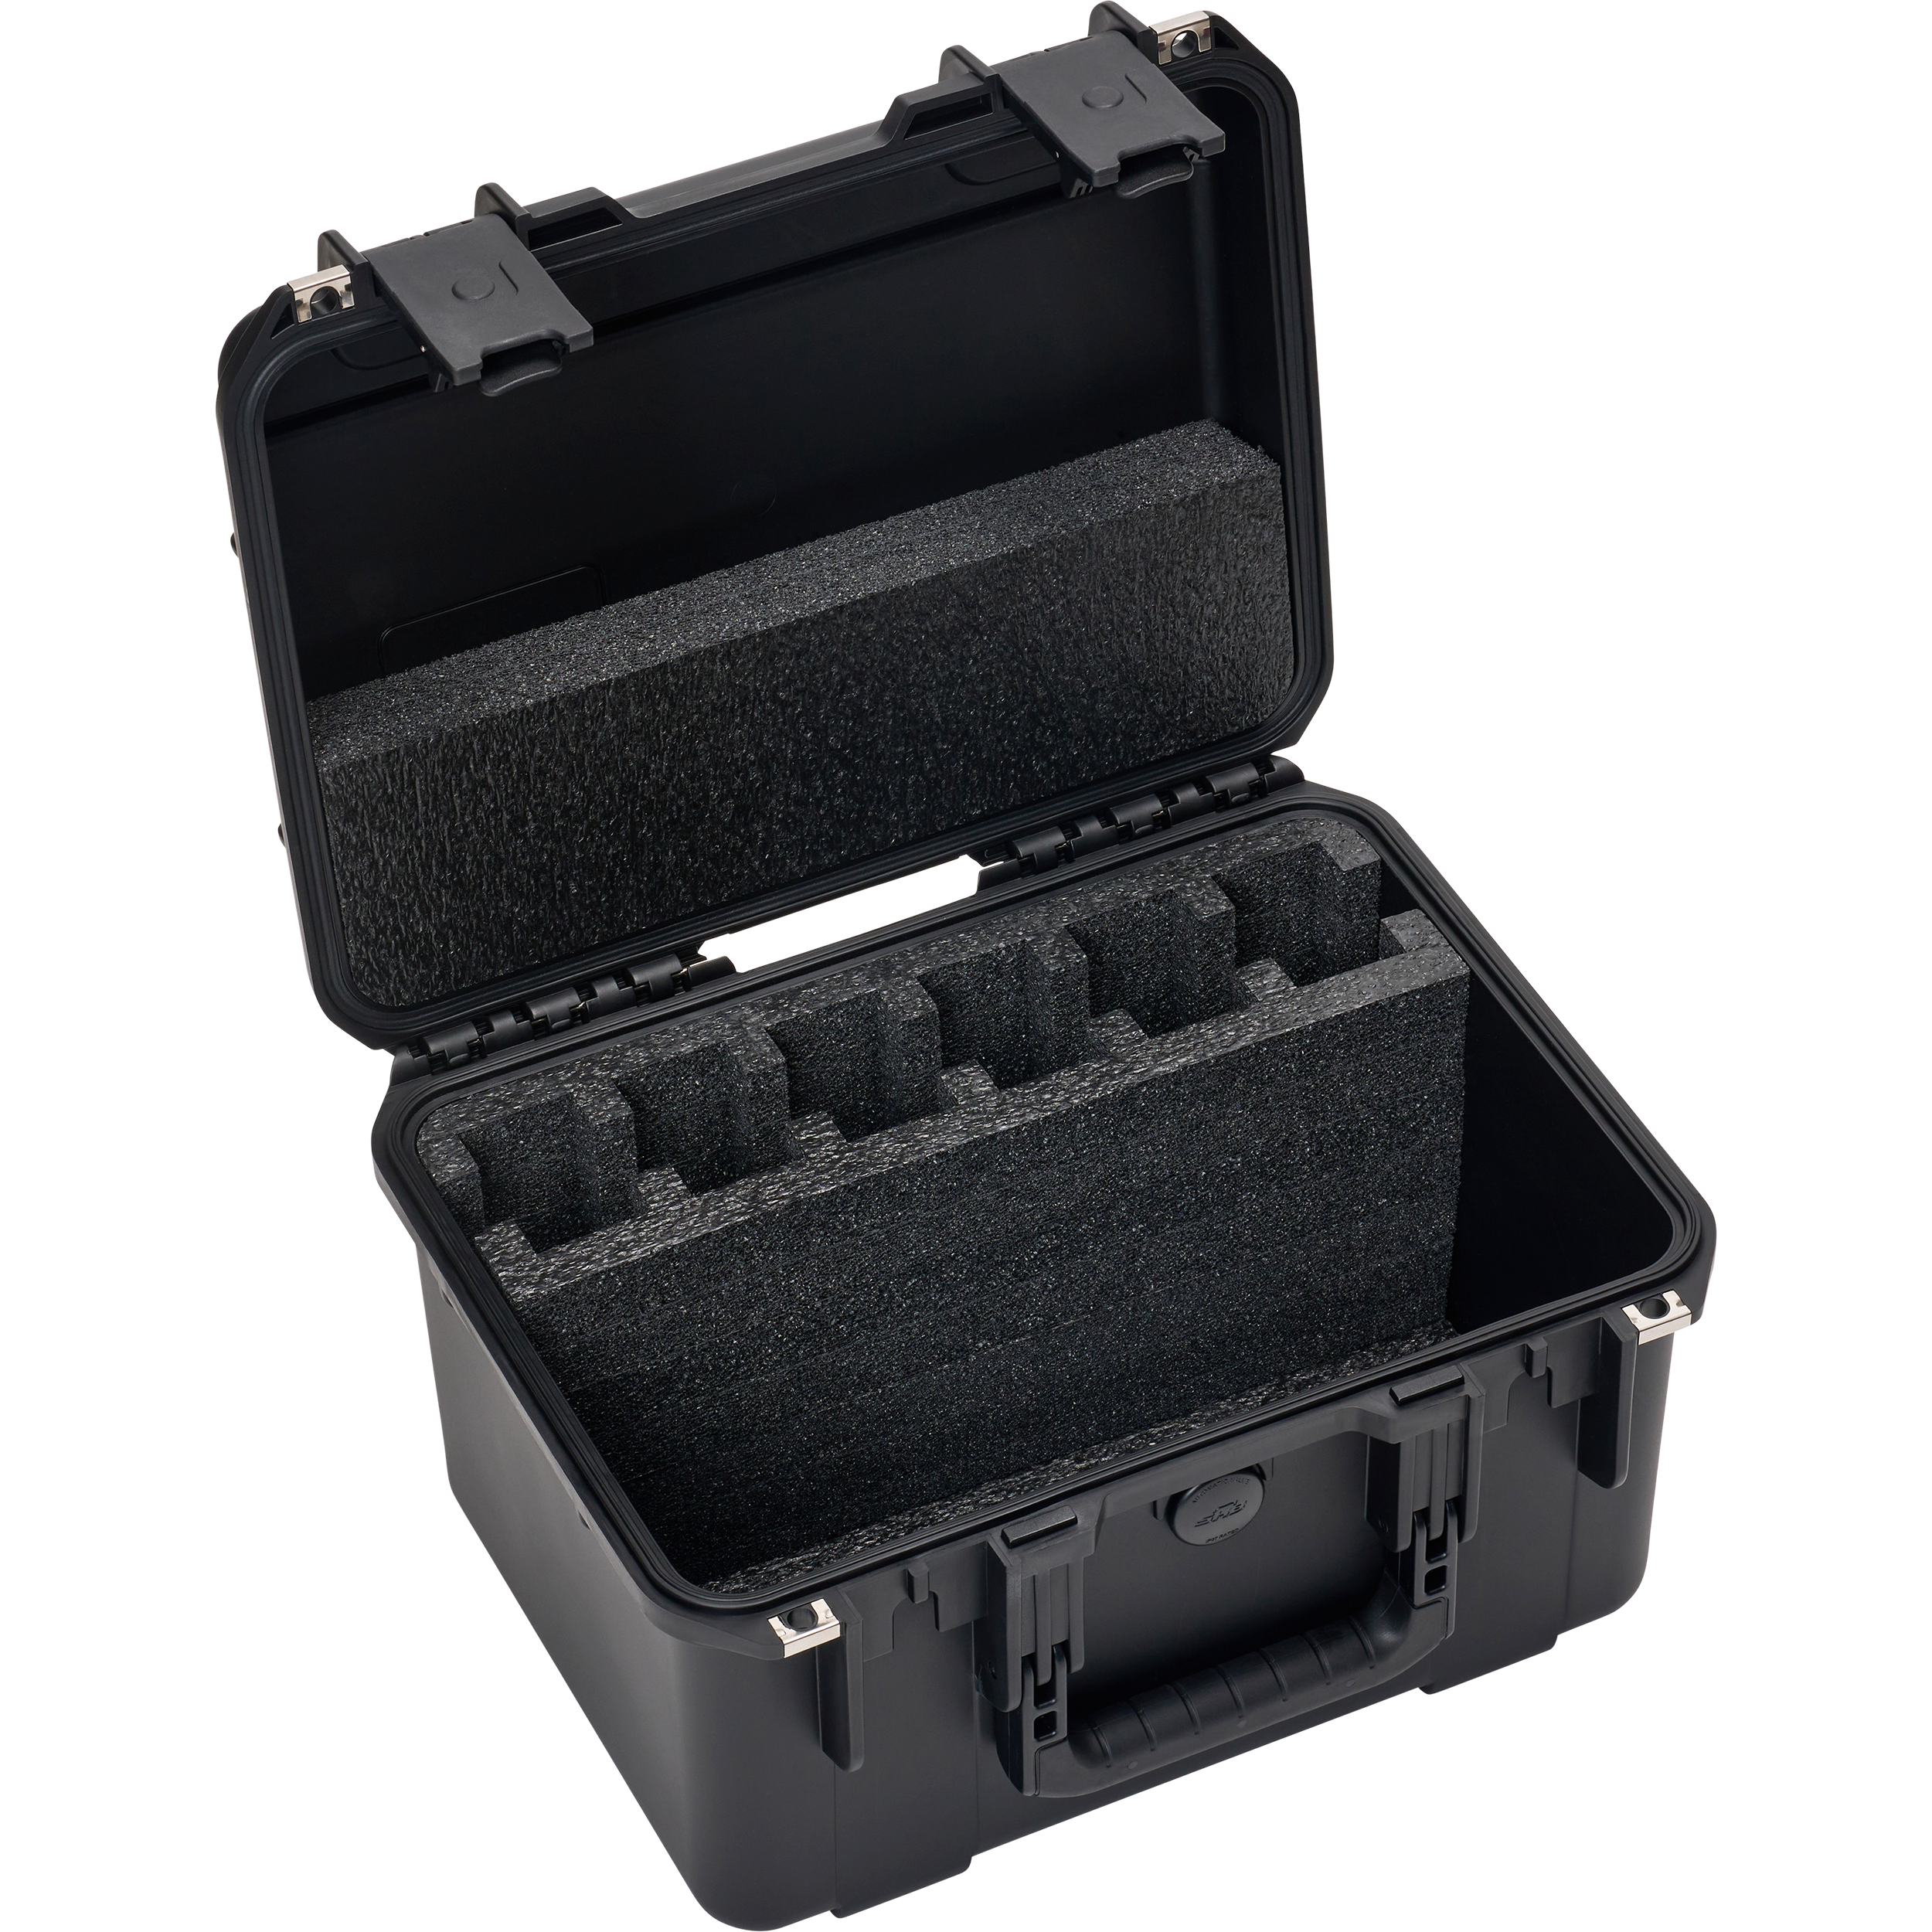 BYFP ipCase for Radial DI 6-pack